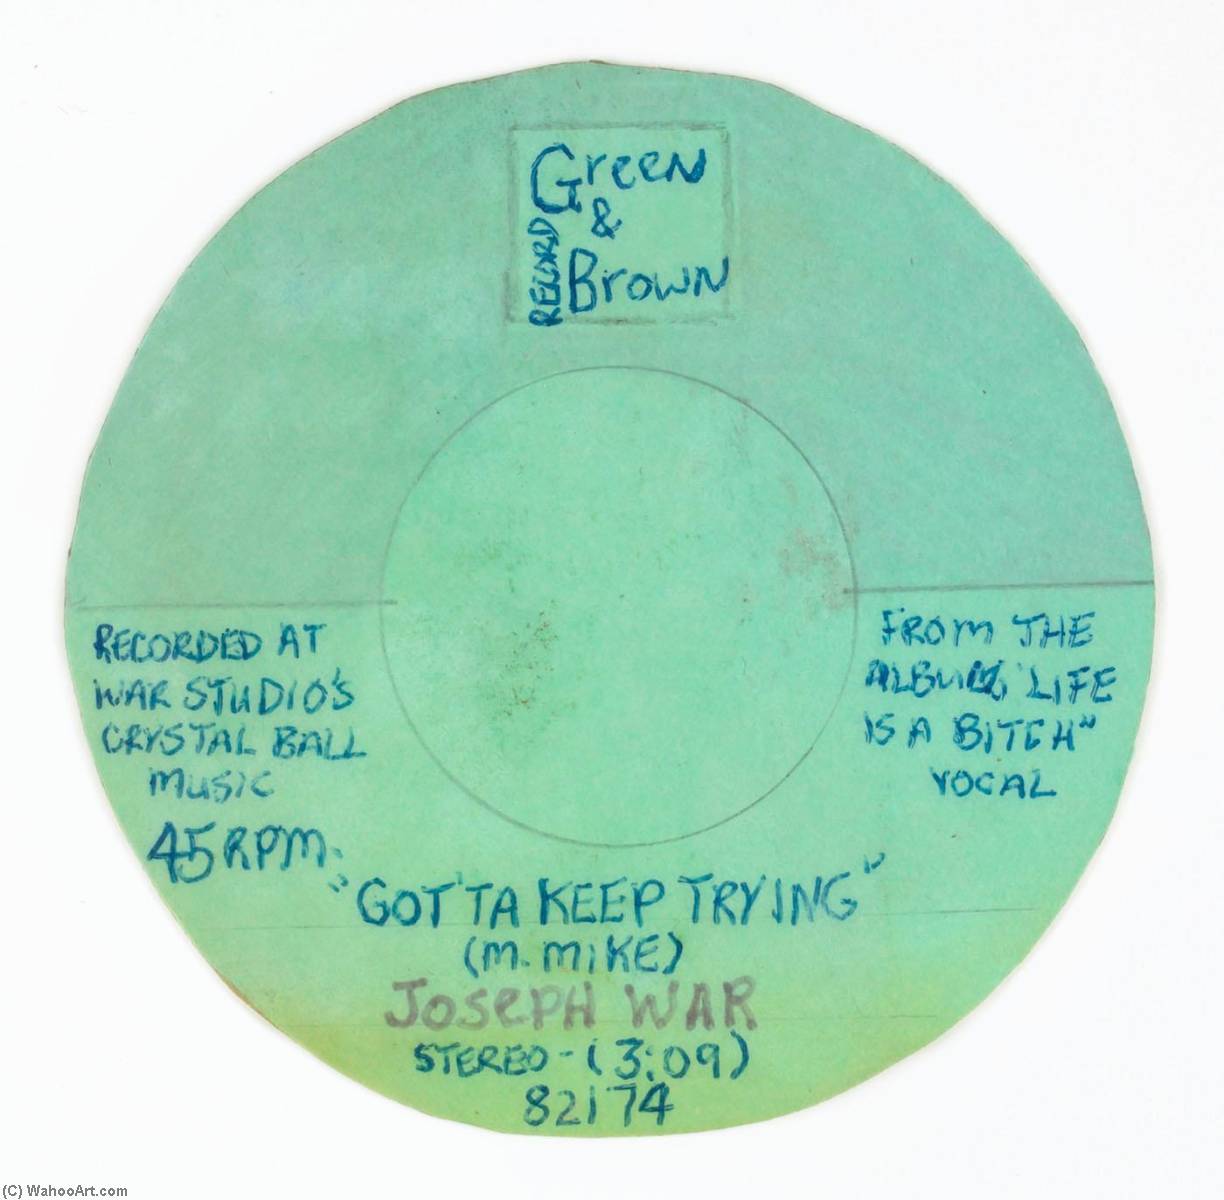 Wikioo.org - สารานุกรมวิจิตรศิลป์ - จิตรกรรม Mingering Mike - GREEN BROWN RECORD FROM THE ALBUM, LIFE IS A BITCH VOCAL, GOTTA KEEP TRYING